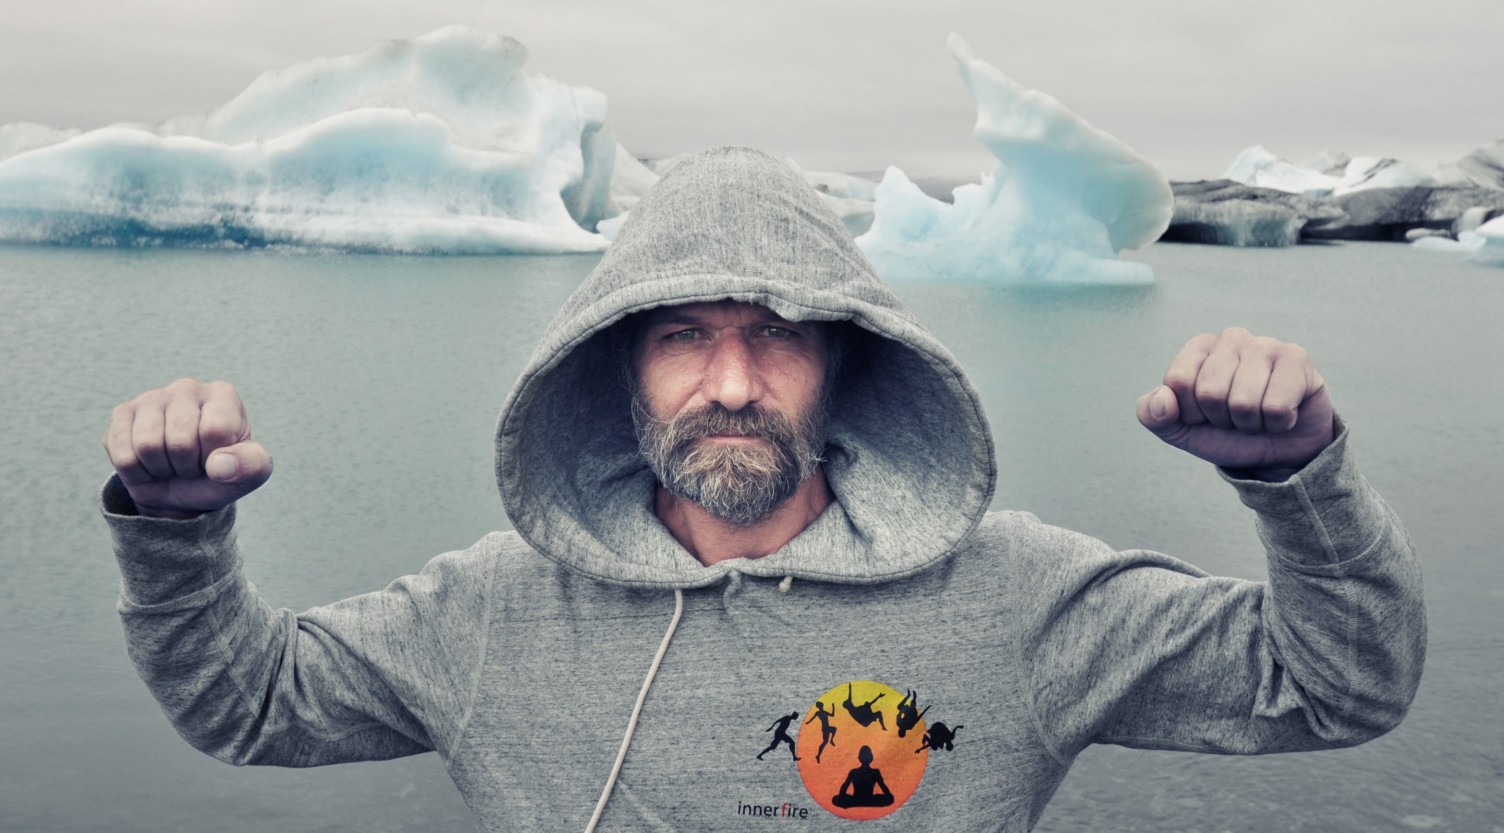 Climb Everest In a T-shirt & Shorts. Survive Submersion In Freezing Water For Hours. Wim Hof Tells You How He Did It! – #403